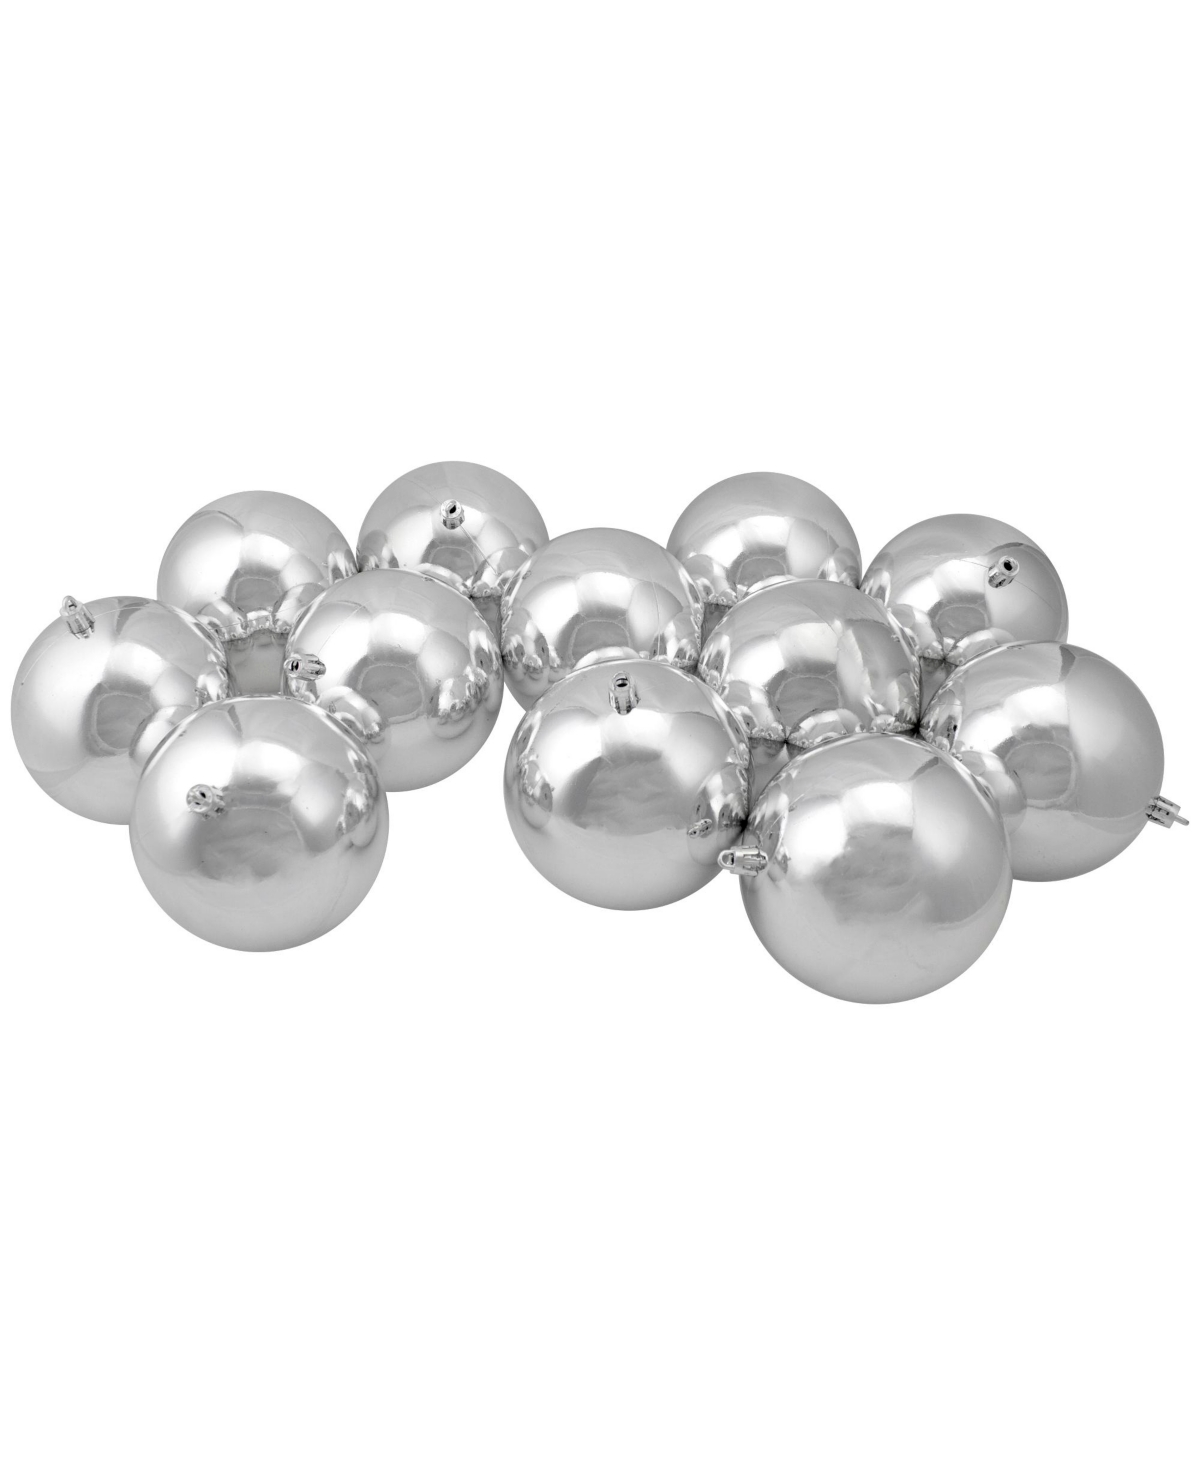 Northlight 12 Count Shatterproof Shiny Christmas Ball Ornaments 100mm Set, 4" In Silver-tone